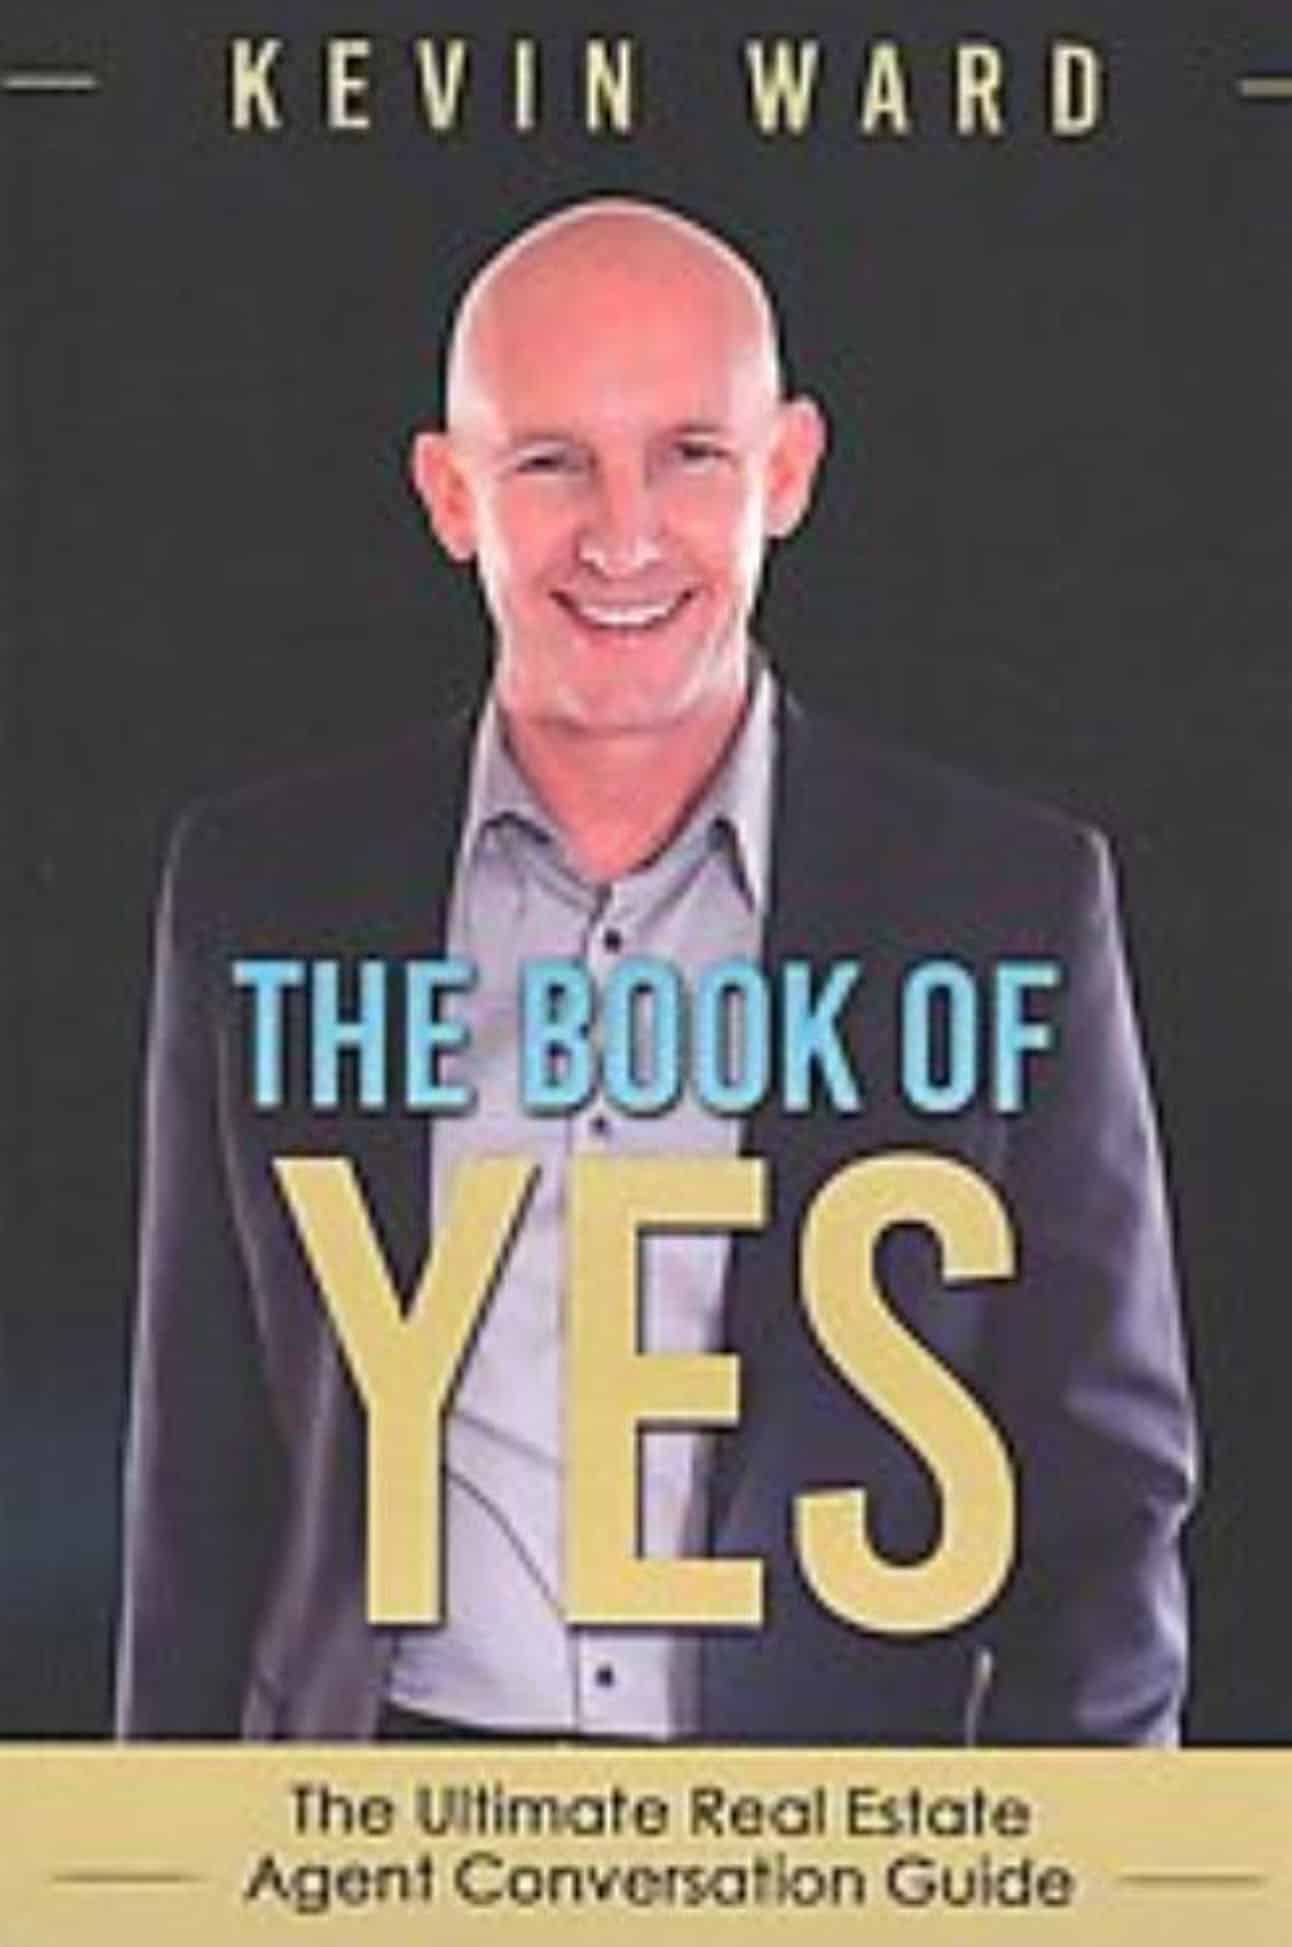 The Book of YES written by Kevin Ward book cover